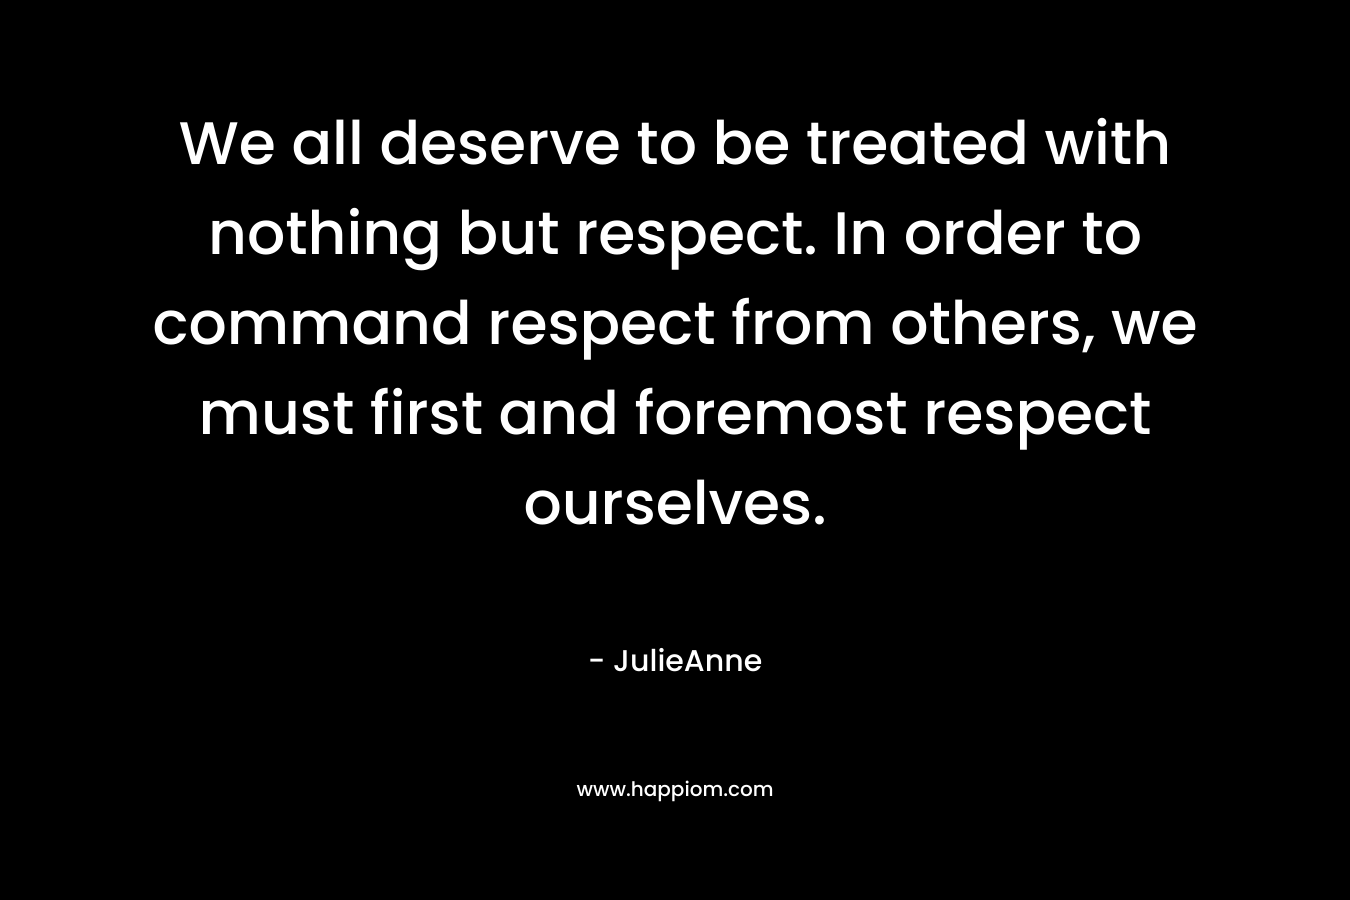 We all deserve to be treated with nothing but respect. In order to command respect from others, we must first and foremost respect ourselves. – JulieAnne